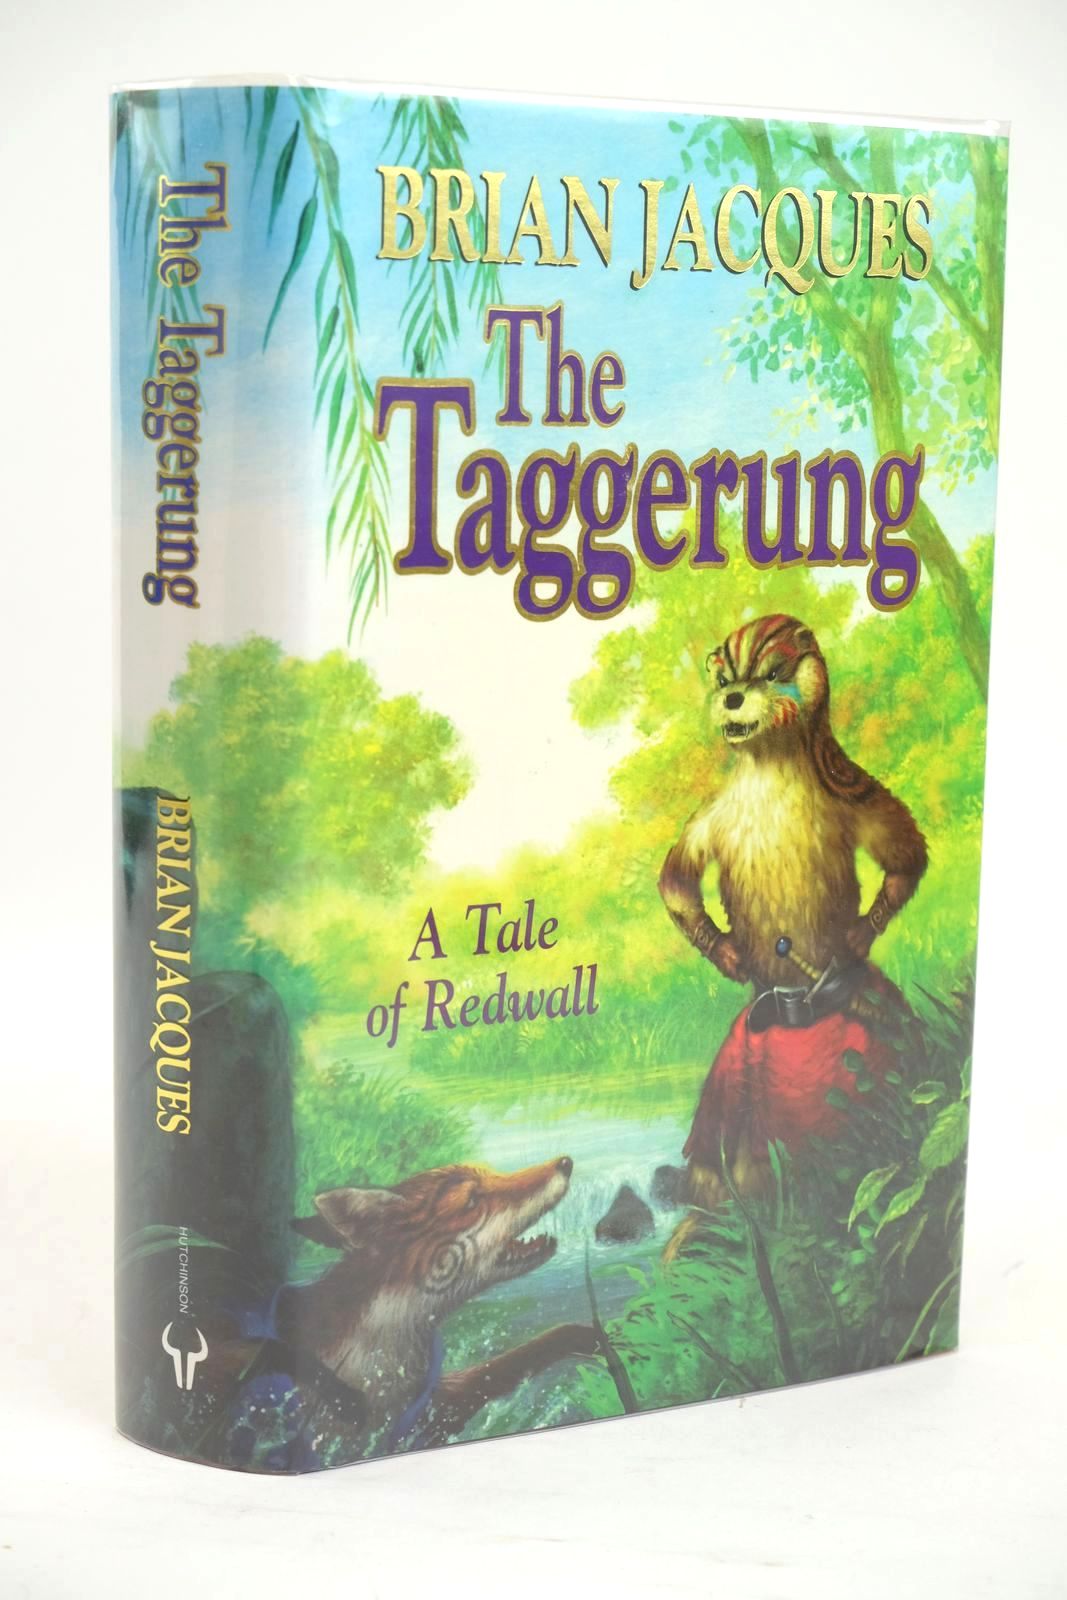 Photo of THE TAGGERUNG written by Jacques, Brian illustrated by Standley, Peter published by Hutchinson (STOCK CODE: 1319404)  for sale by Stella & Rose's Books